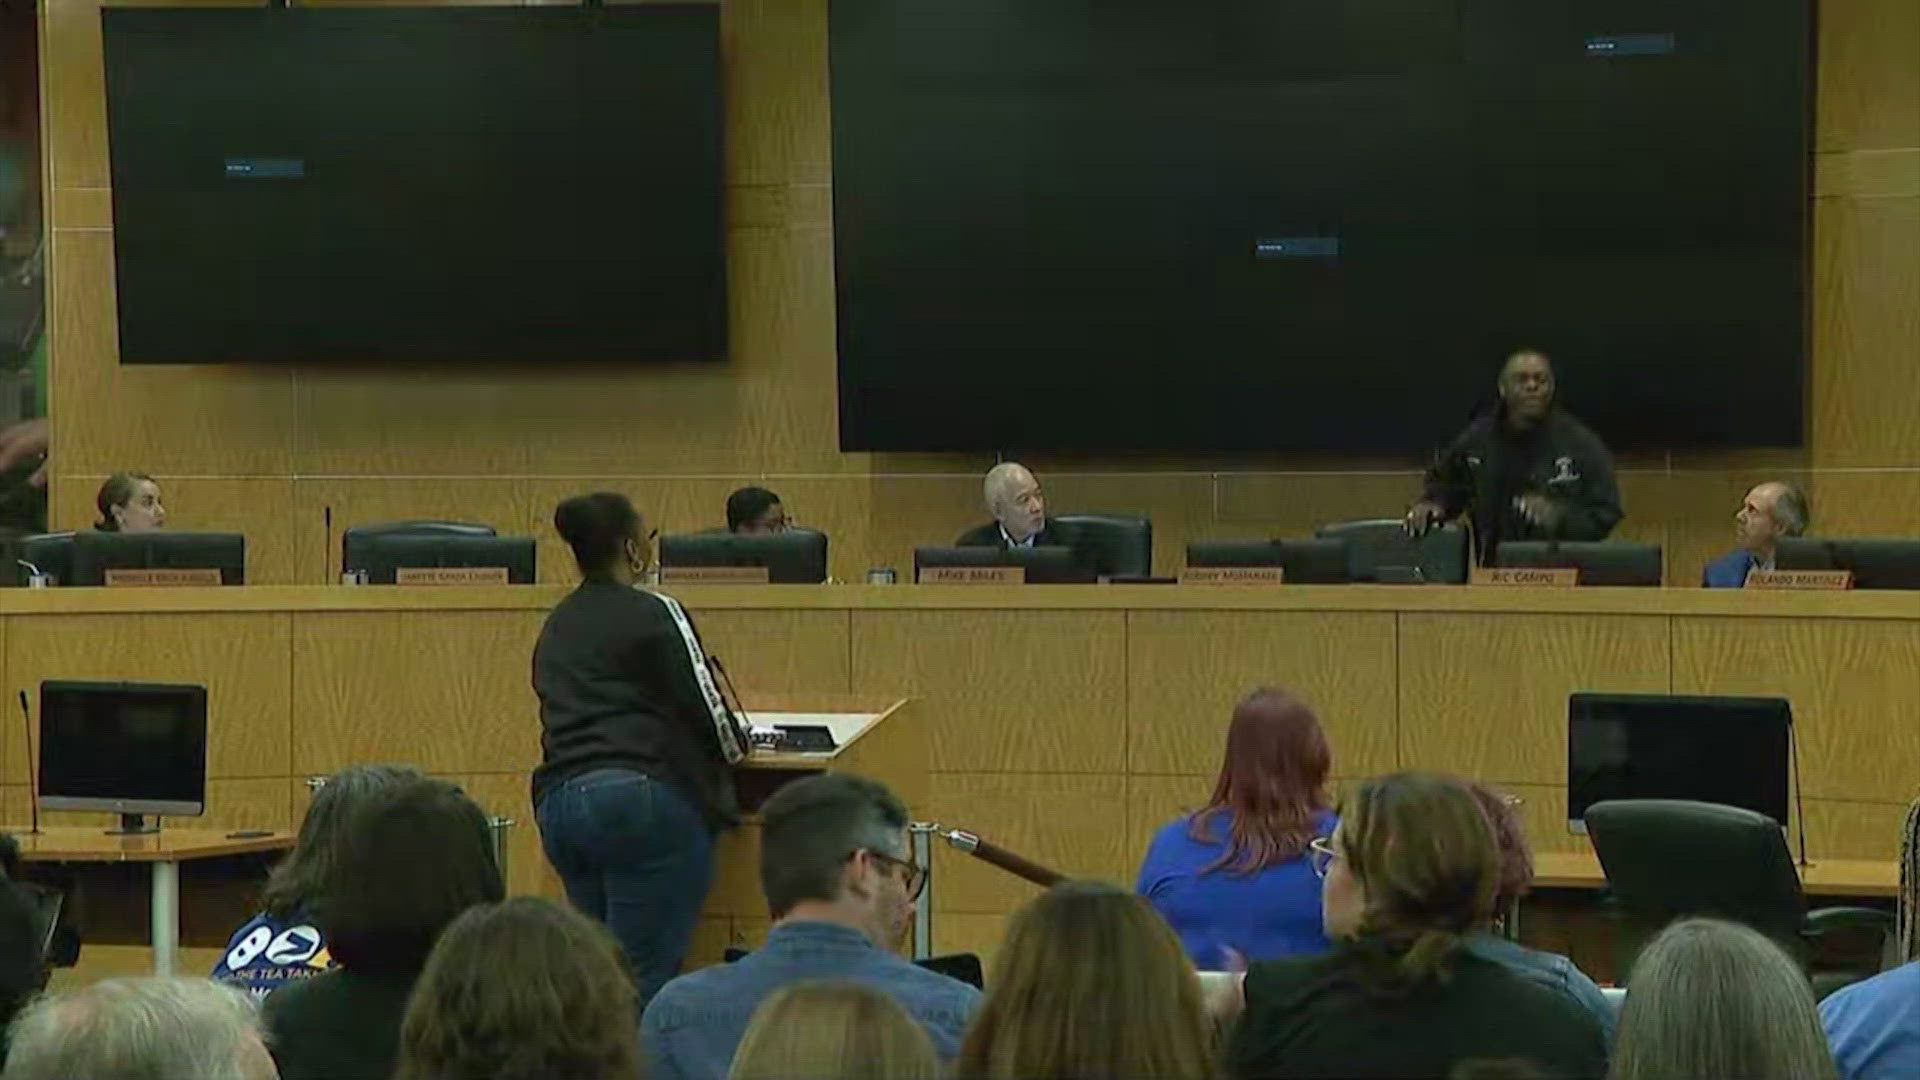 An HISD board meeting was cut short when the power cut out. The district also announced campuses would be closed Friday due to the widespread damage.